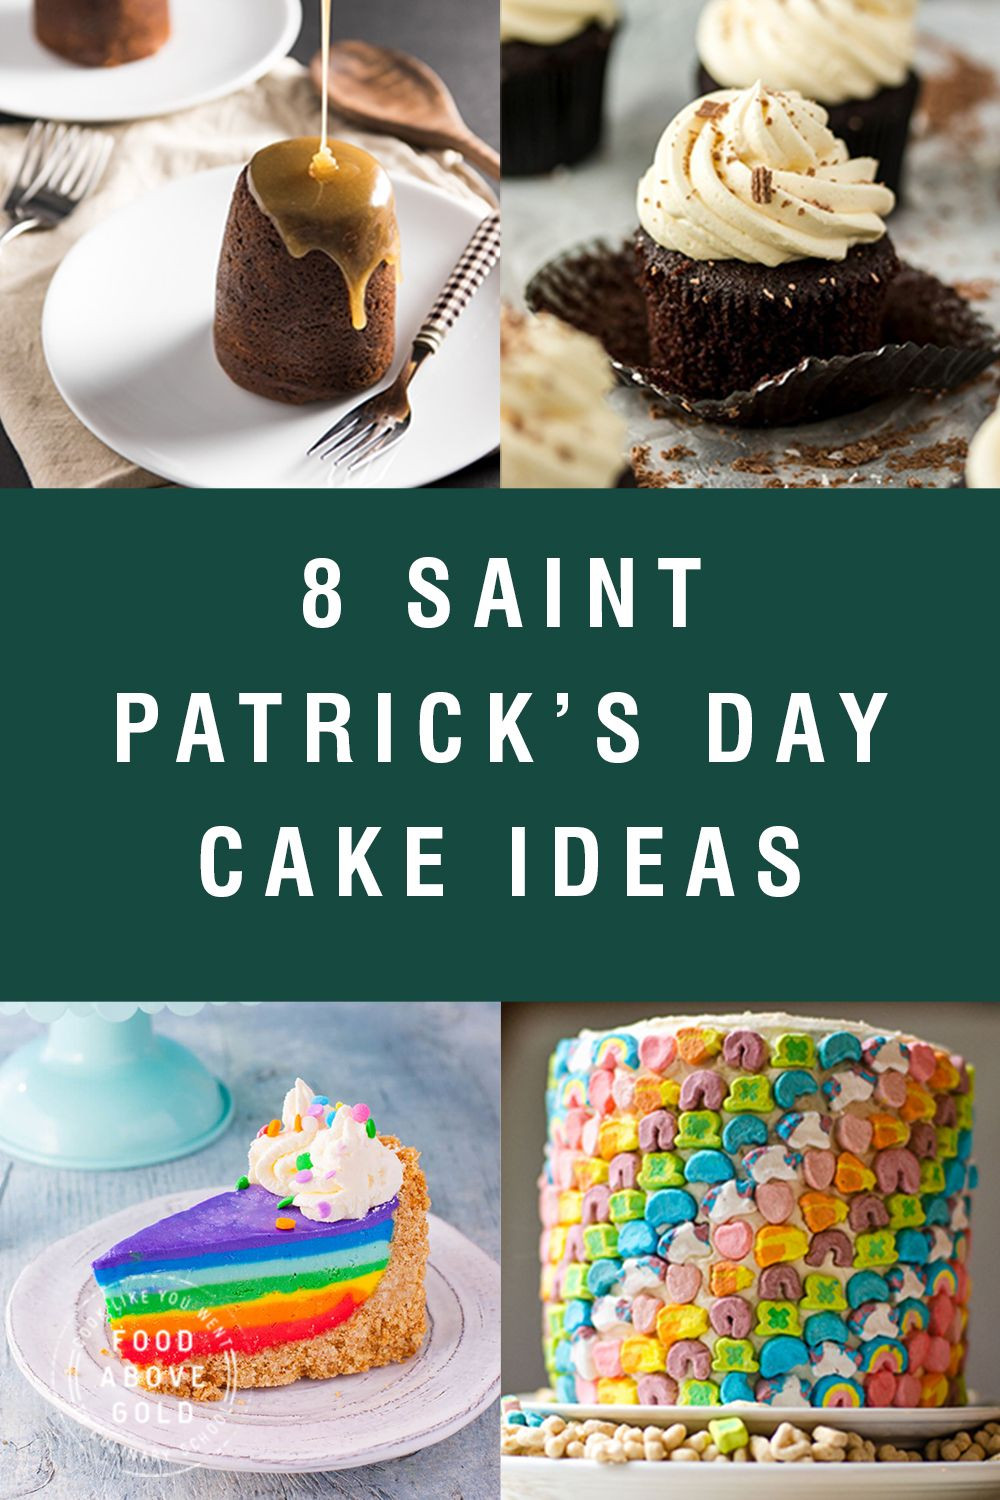 St Patrick's Day Cake Ideas
 8 Can t Miss St Patrick s Day Cake Ideas